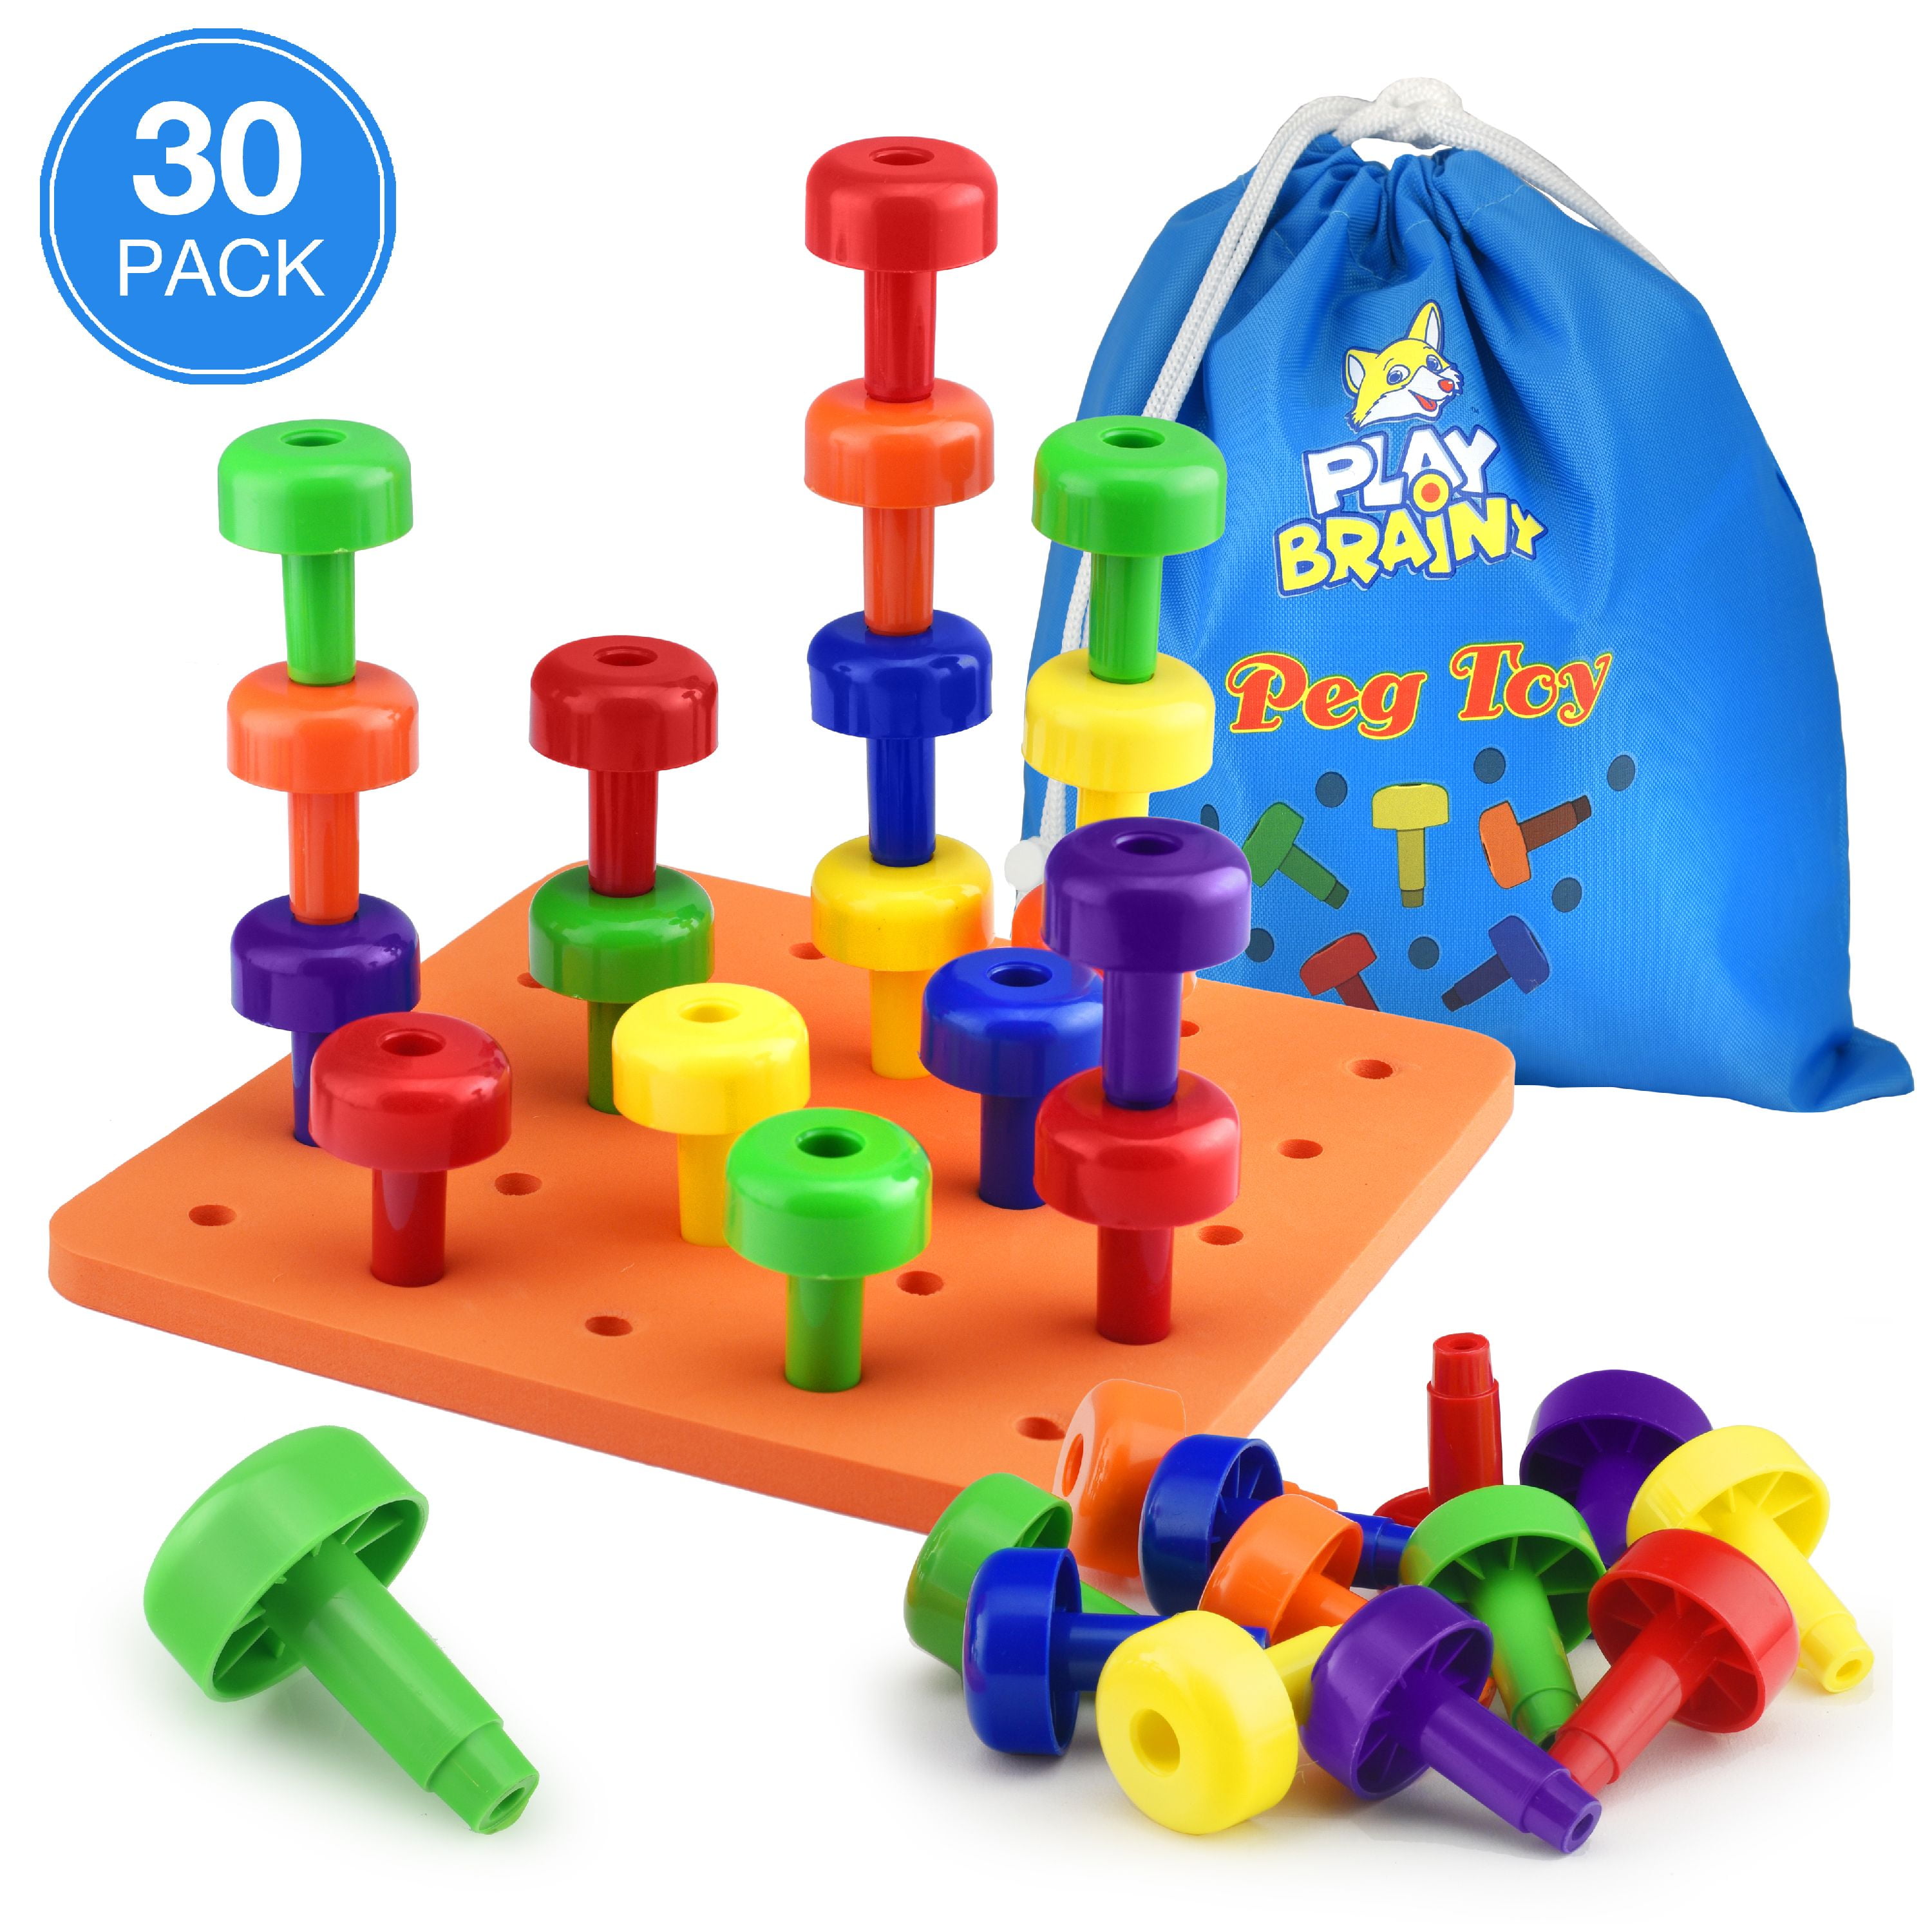 Sorting and Counting Smart Keiki Stacking PEG Board Set Toy and Educational Activity Board with 36 PEGs and Bag for Toddlers and Kids Best Montessori Inspired Sensory Toy for Learning Colors 